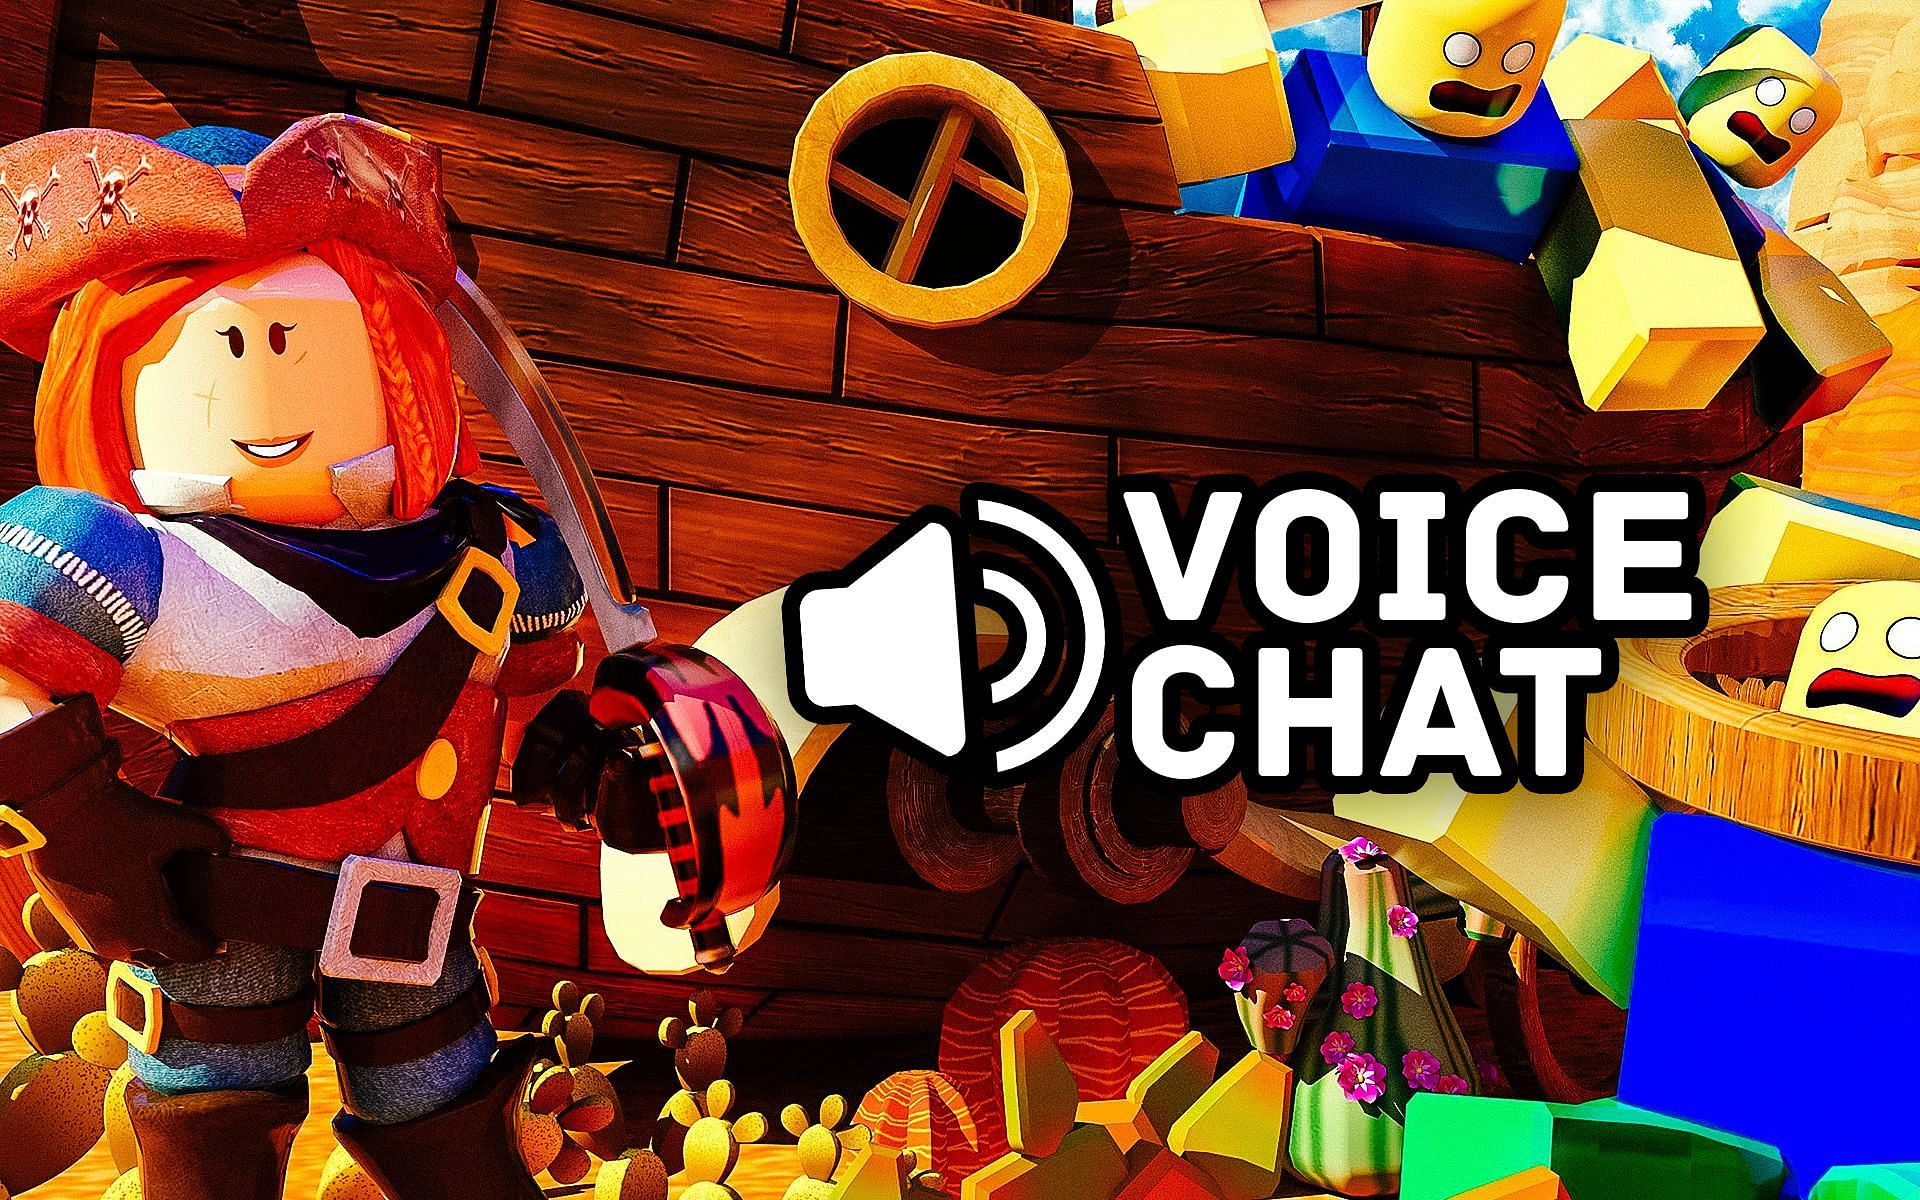 How to enable voice chat in Roblox: Step-by-step guide for beginners